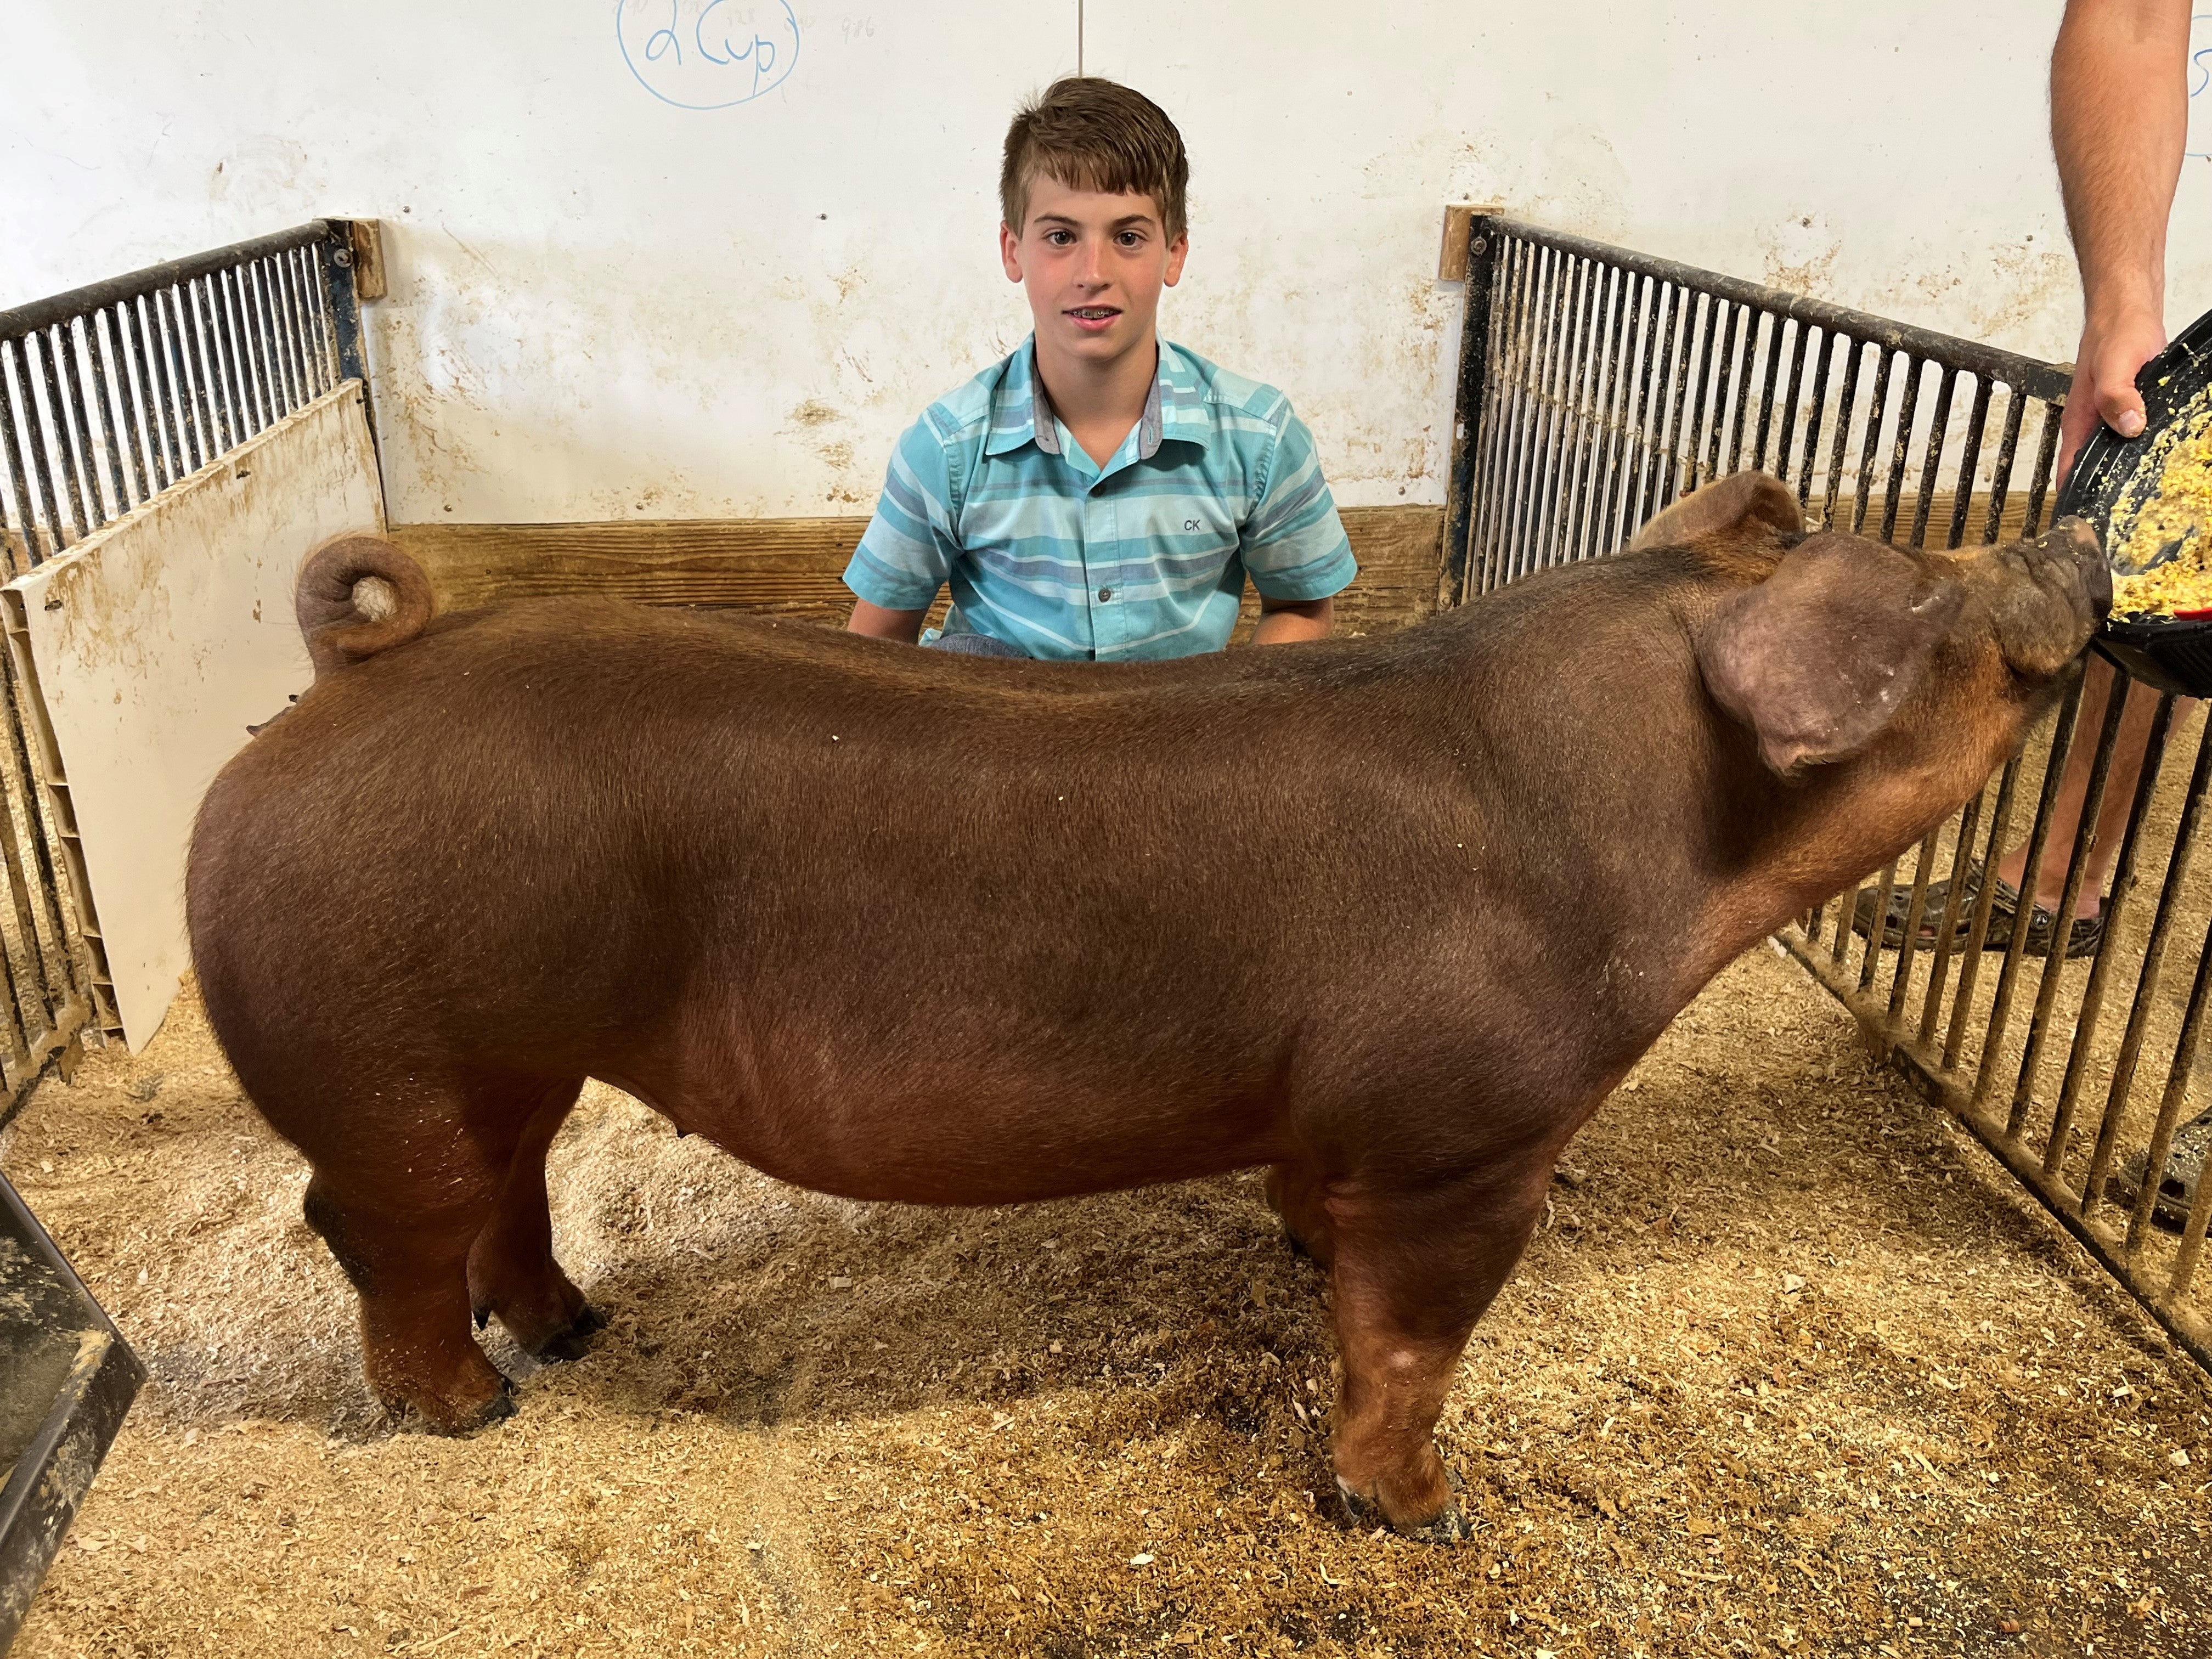 Ayden Tusing posing with a pig